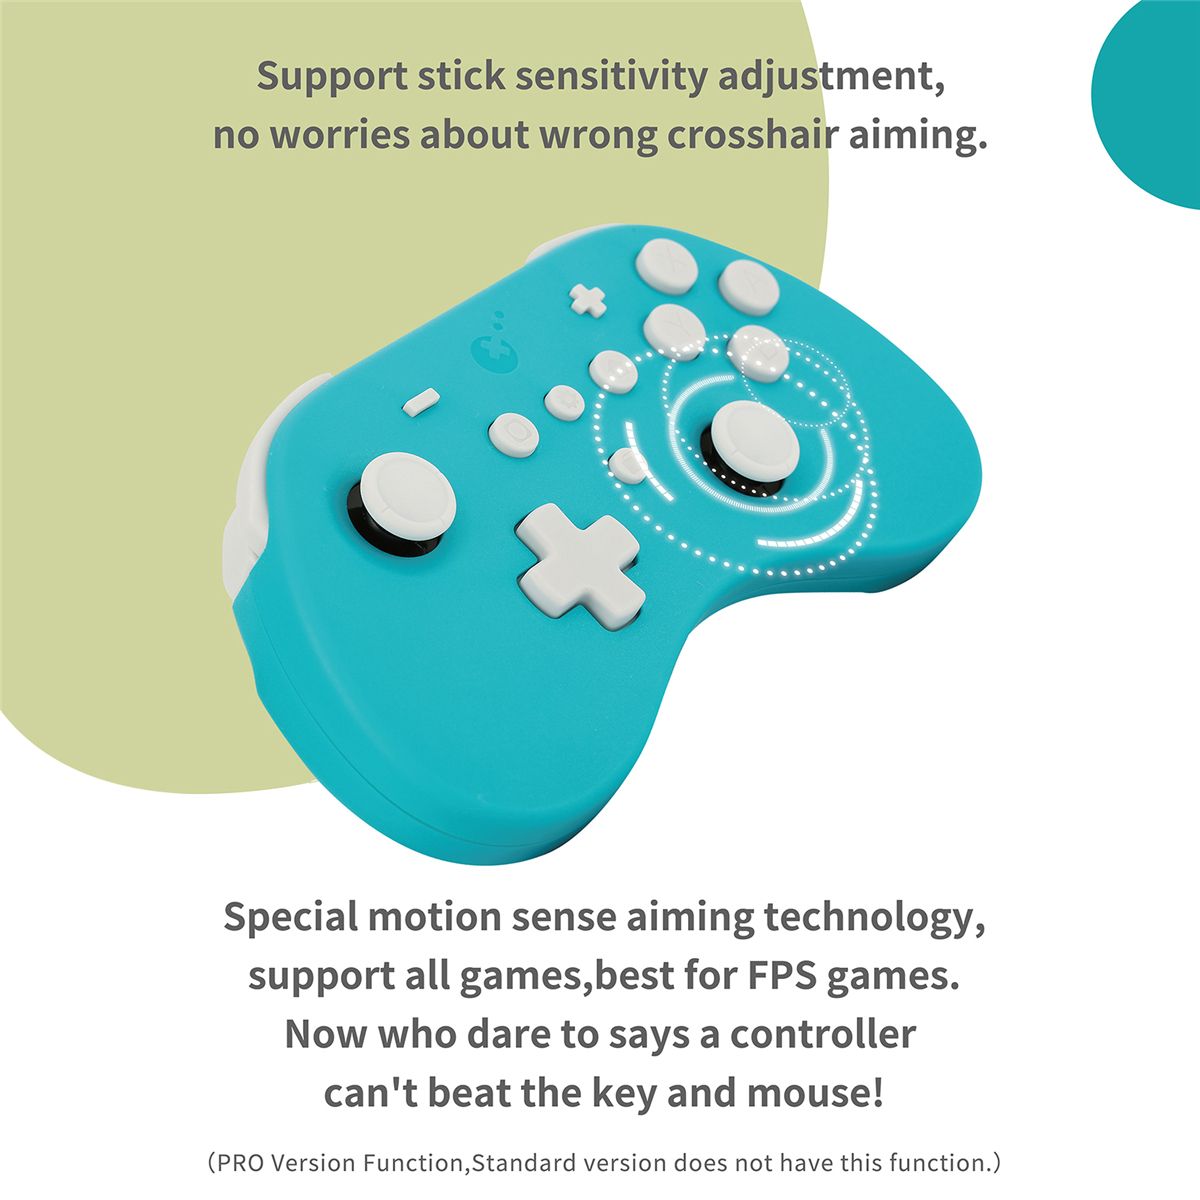 Gulikit-NS19-Wireless-Controller-bluetooth-Pro-Gamepad-For-Console-Gaming-Joystick-Video-Game-USB-Co-1768672